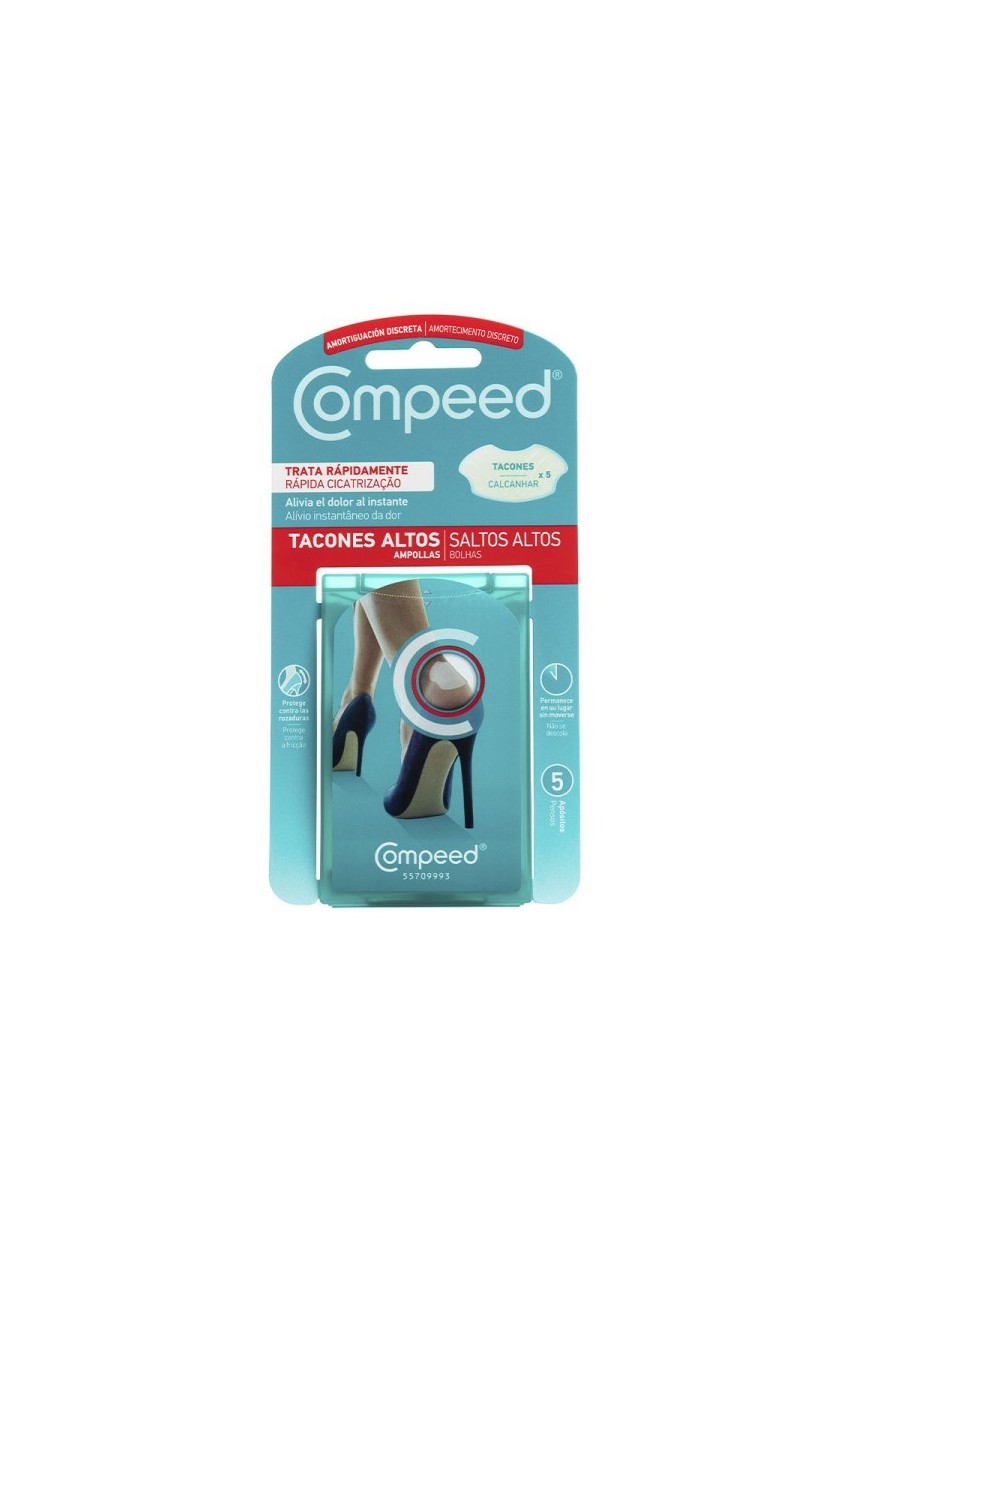 Compeed Big Heel Ampoules 5 Units